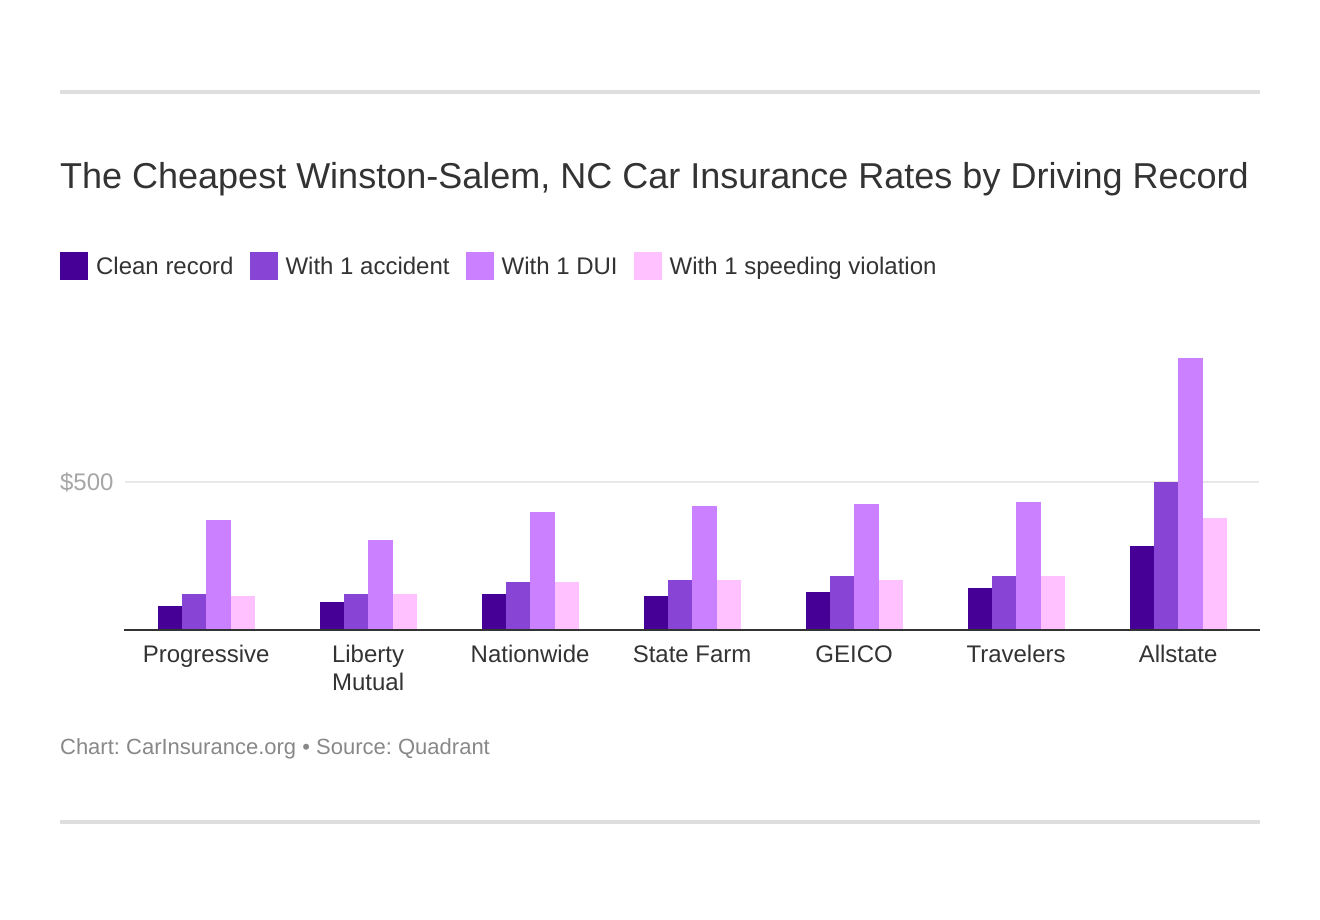 The Cheapest Winston-Salem, NC Car Insurance Rates by Driving Record